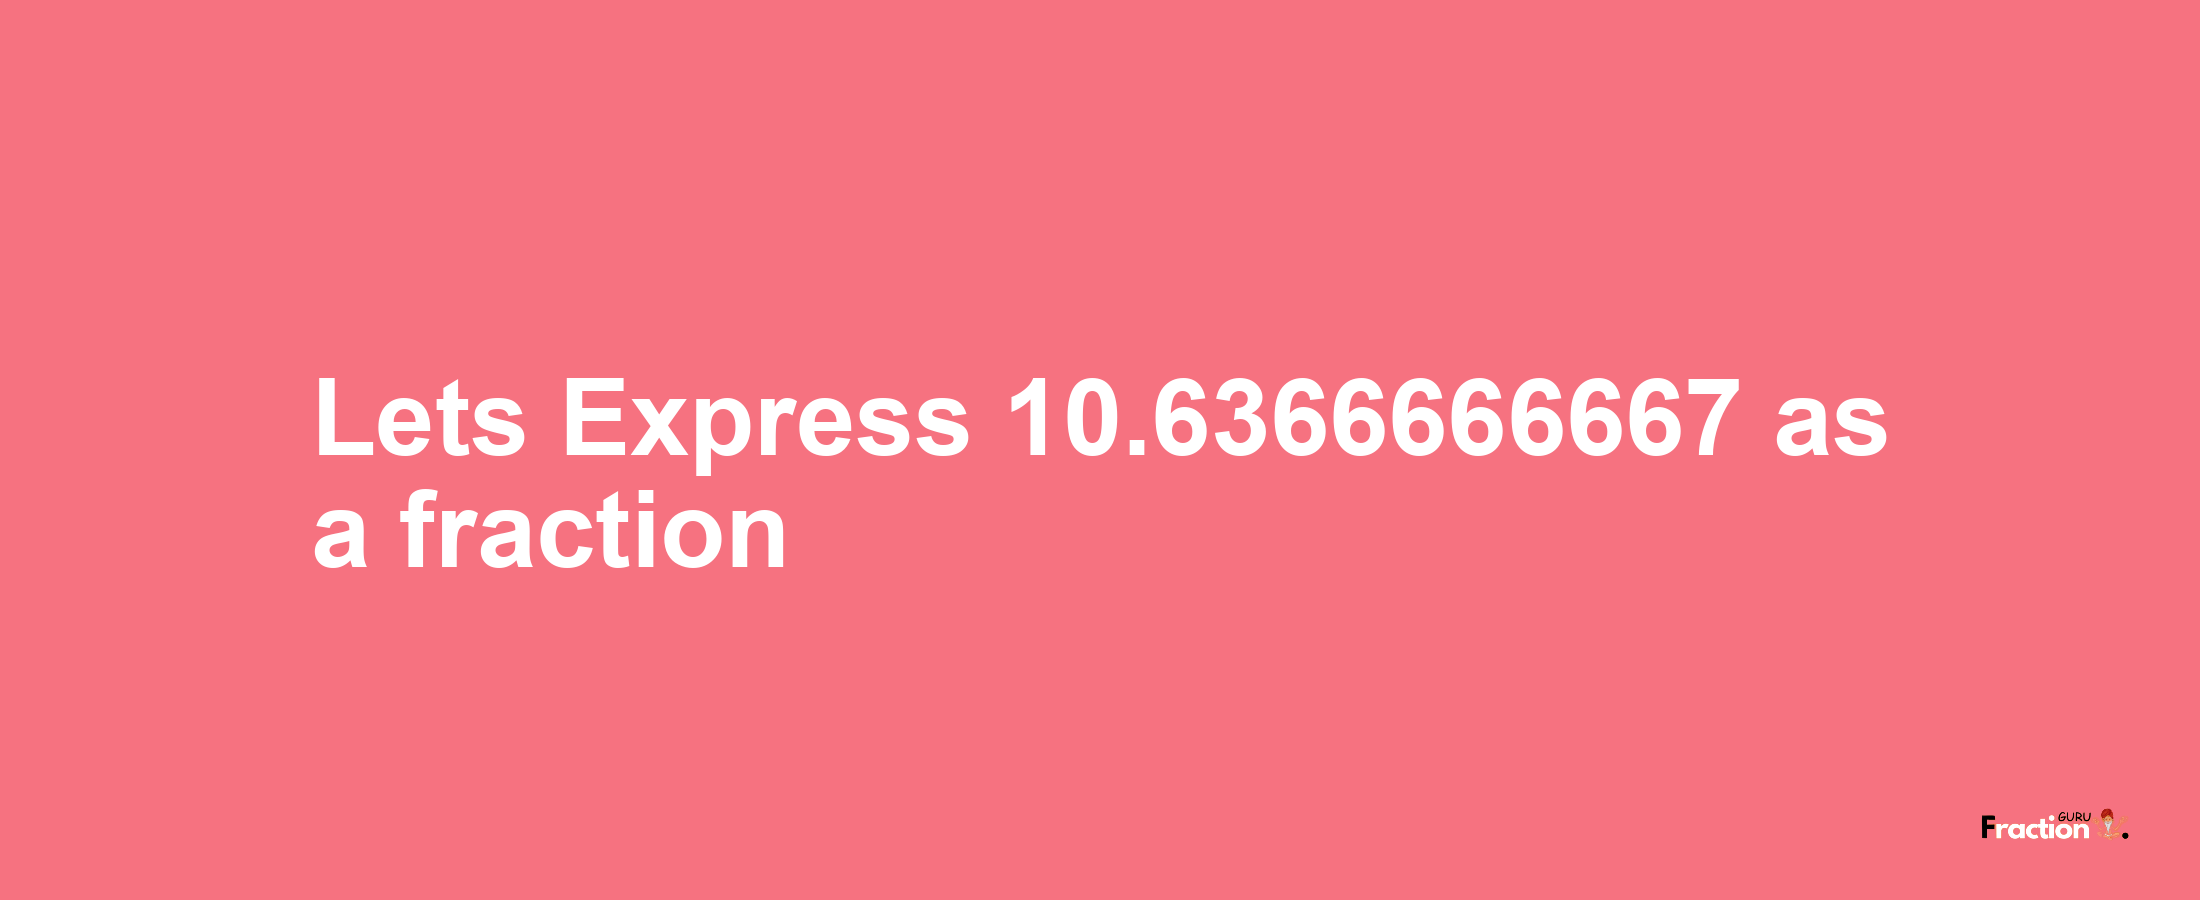 Lets Express 10.6366666667 as afraction